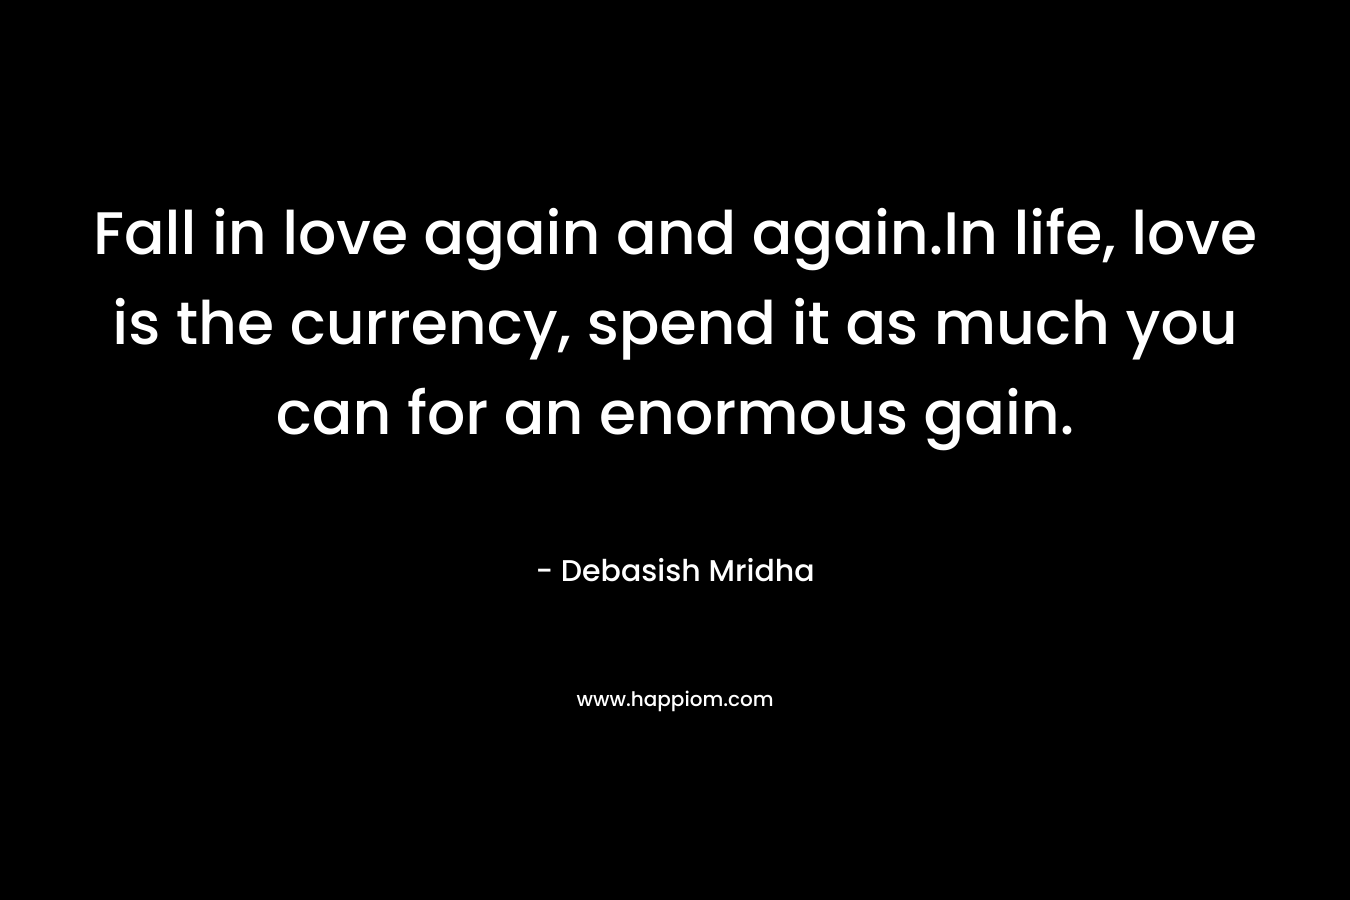 Fall in love again and again.In life, love is the currency, spend it as much you can for an enormous gain.